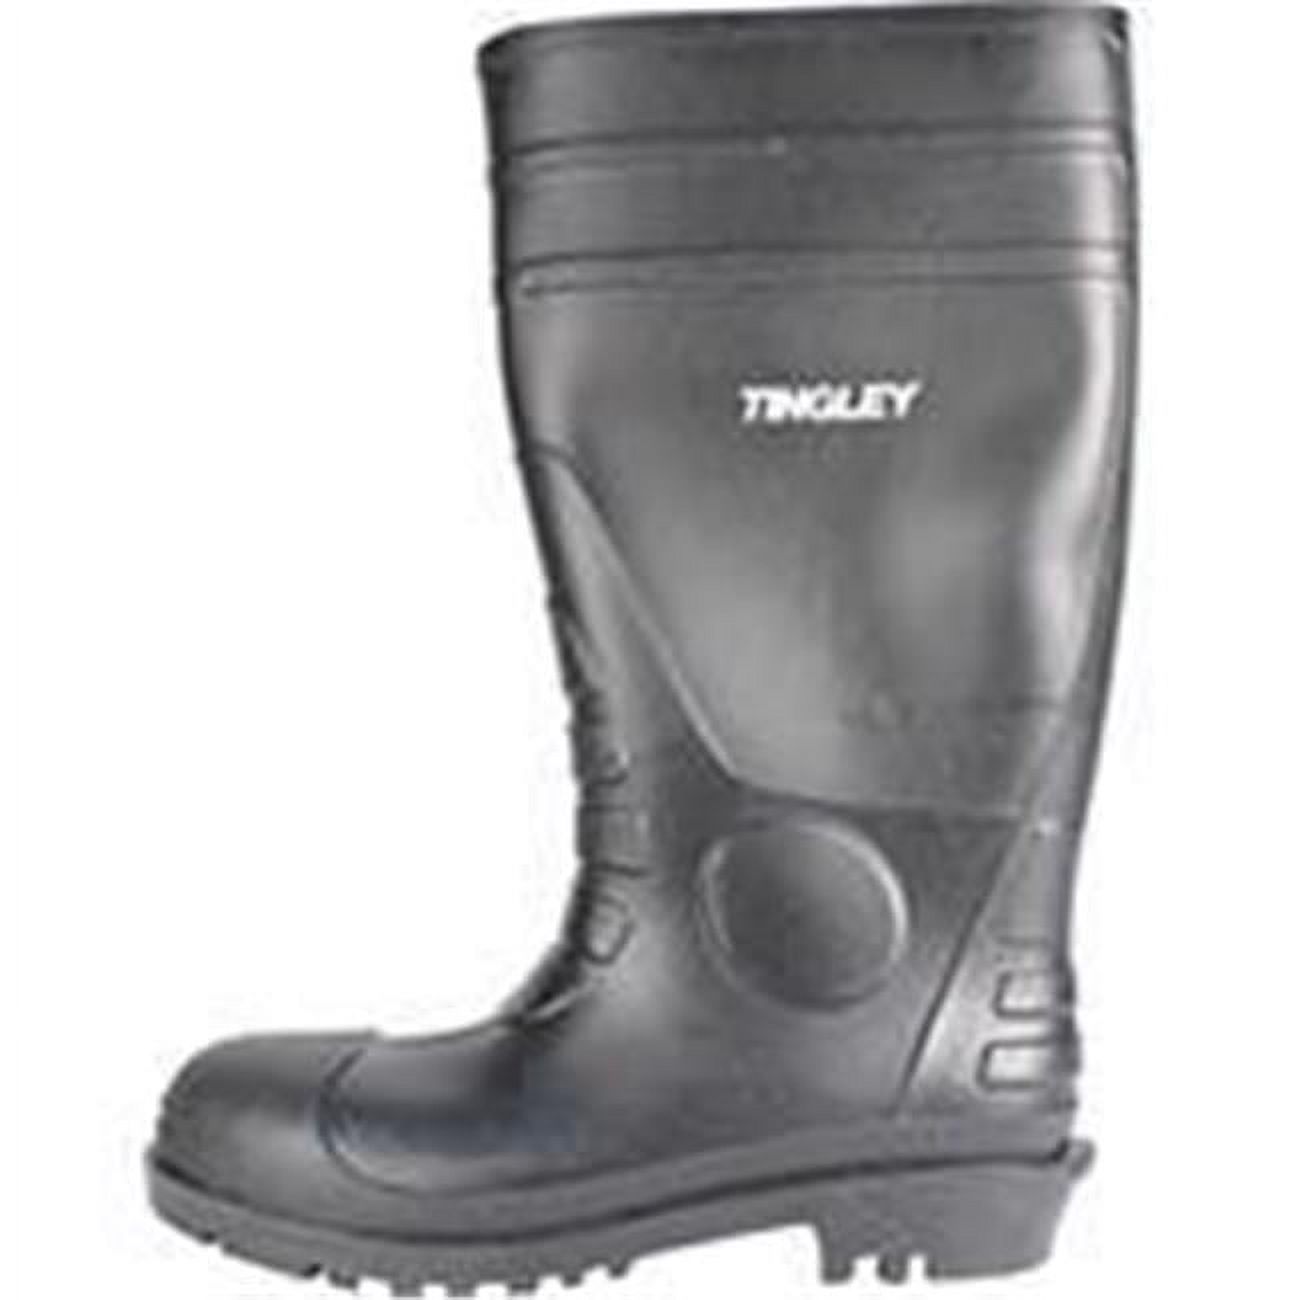 Tingley Rubber Corp. 31151.06 Economy PVC Knee Boots - Black Size 6 - image 1 of 1